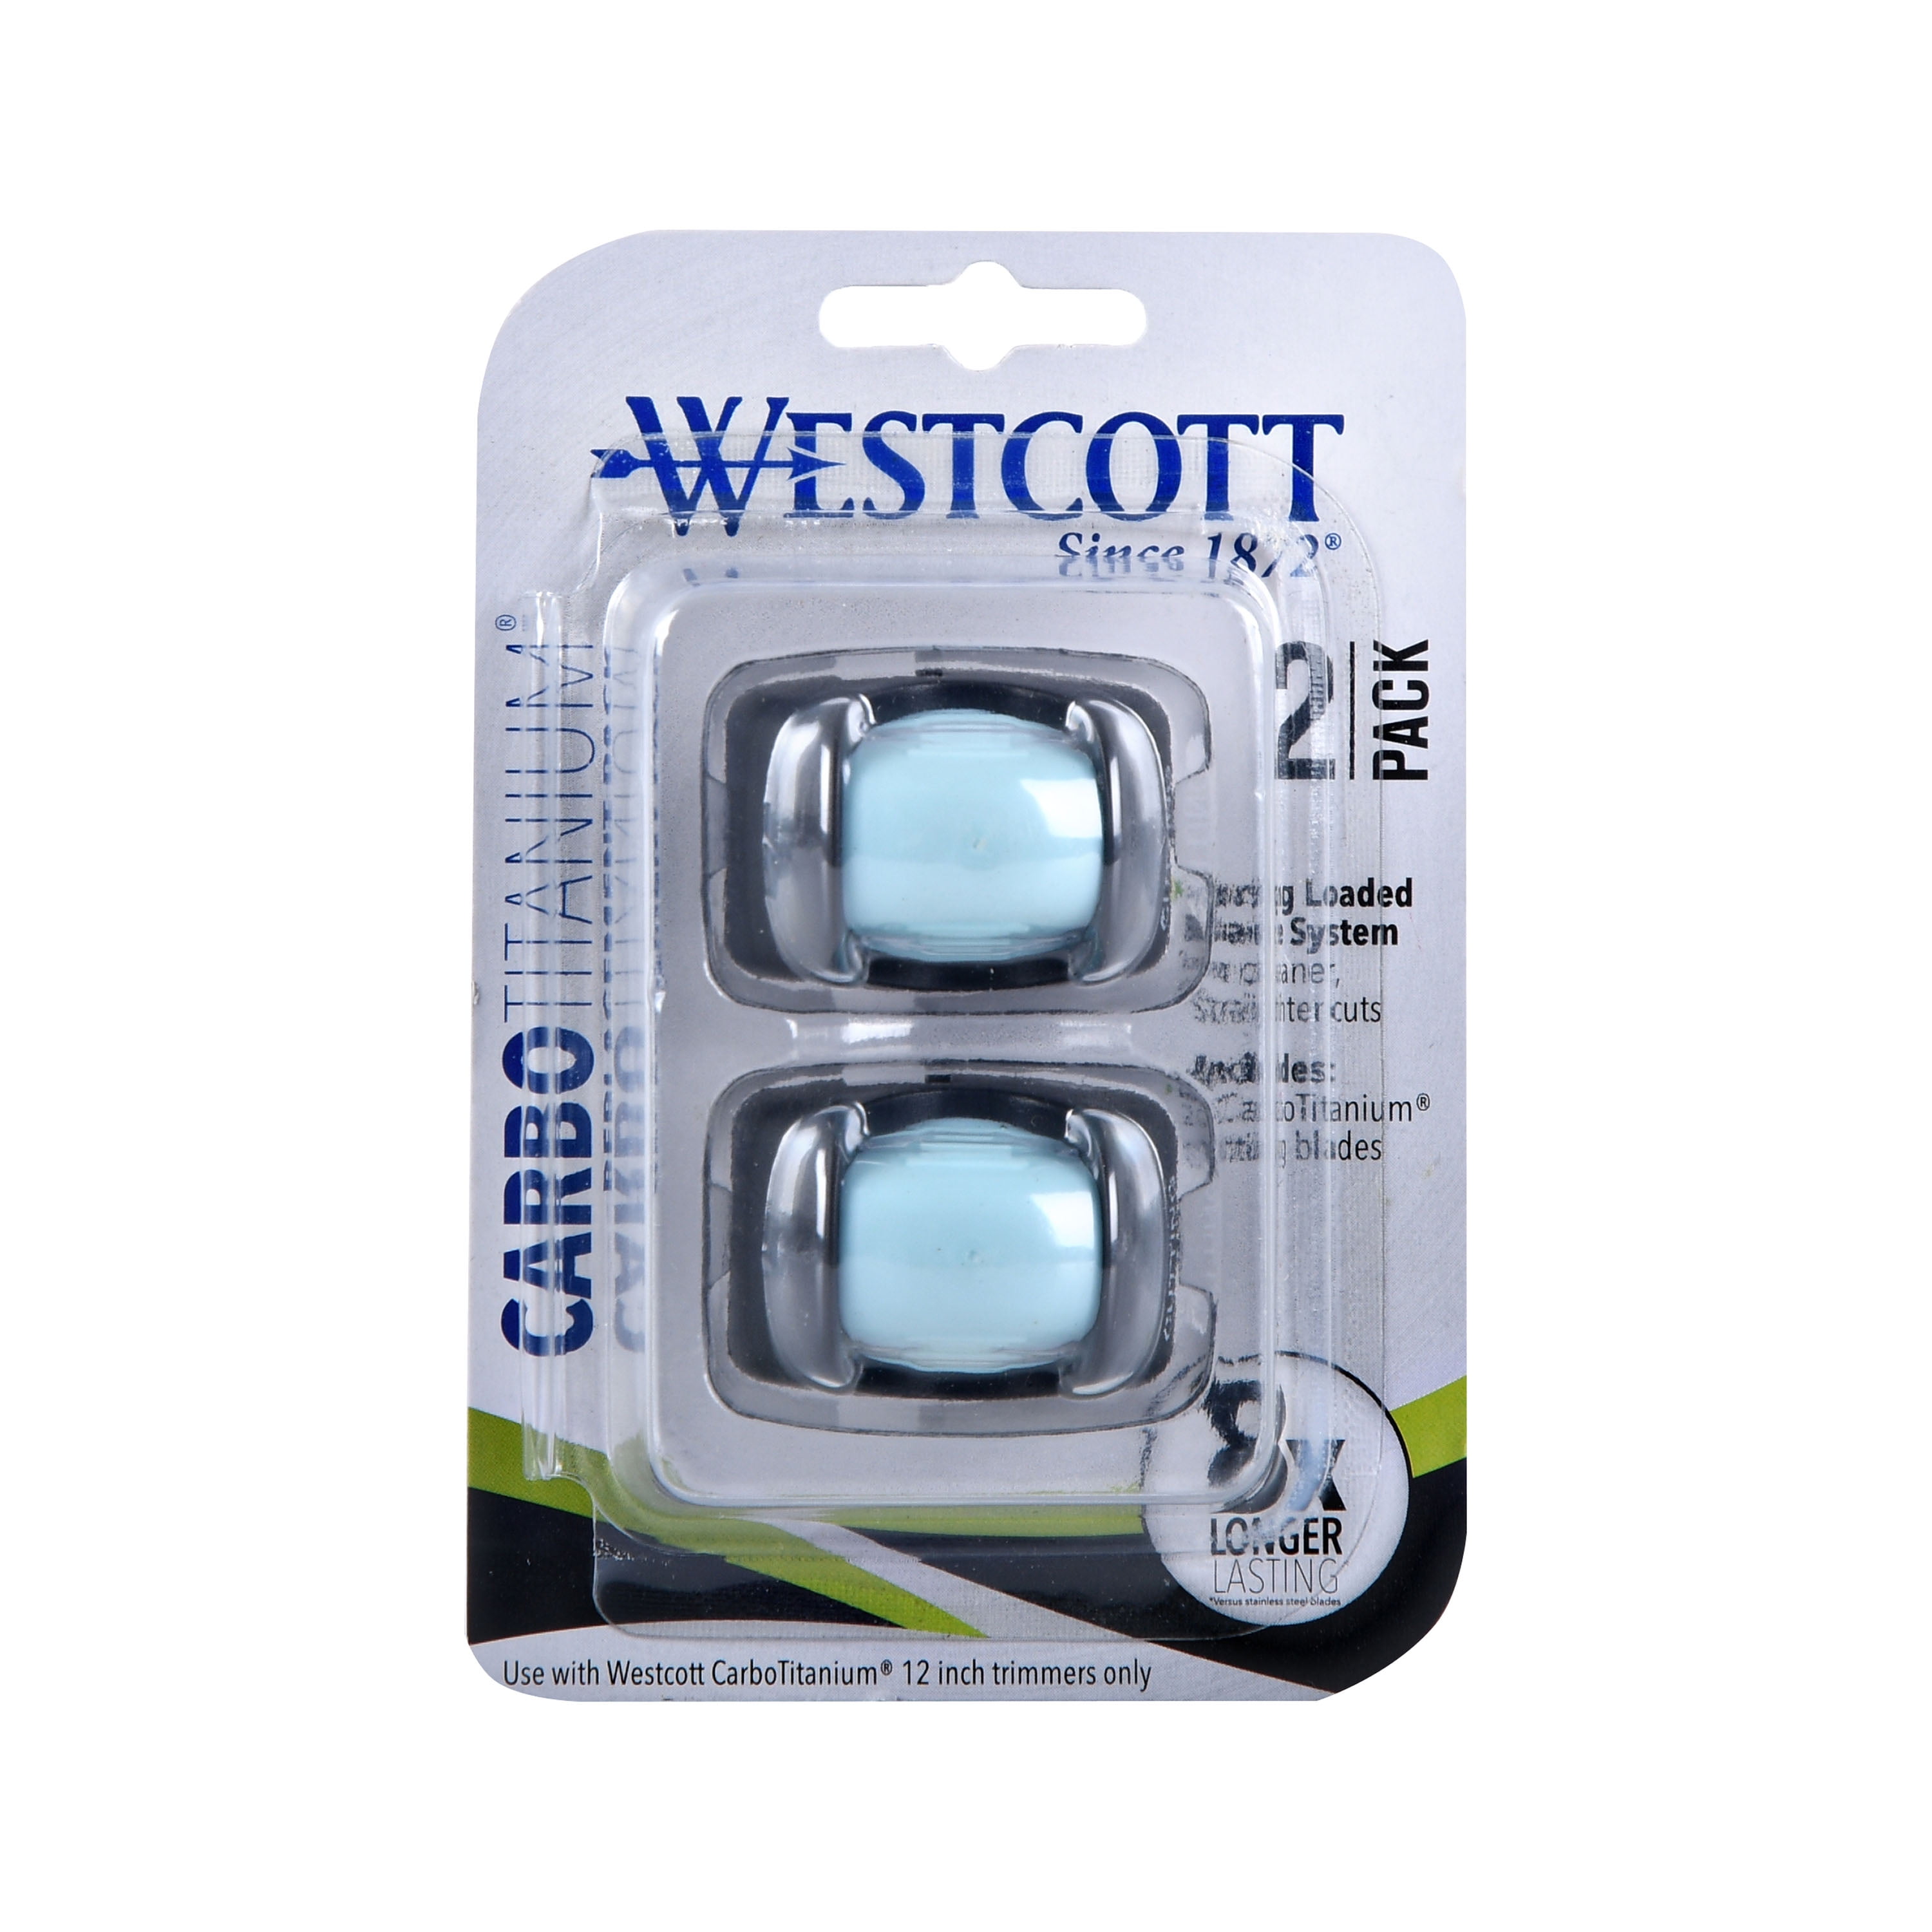 Blade Westcott Replacement Blades 9mm Metal E-84007 00 Refill Blades 4027521840072 Box of 10 